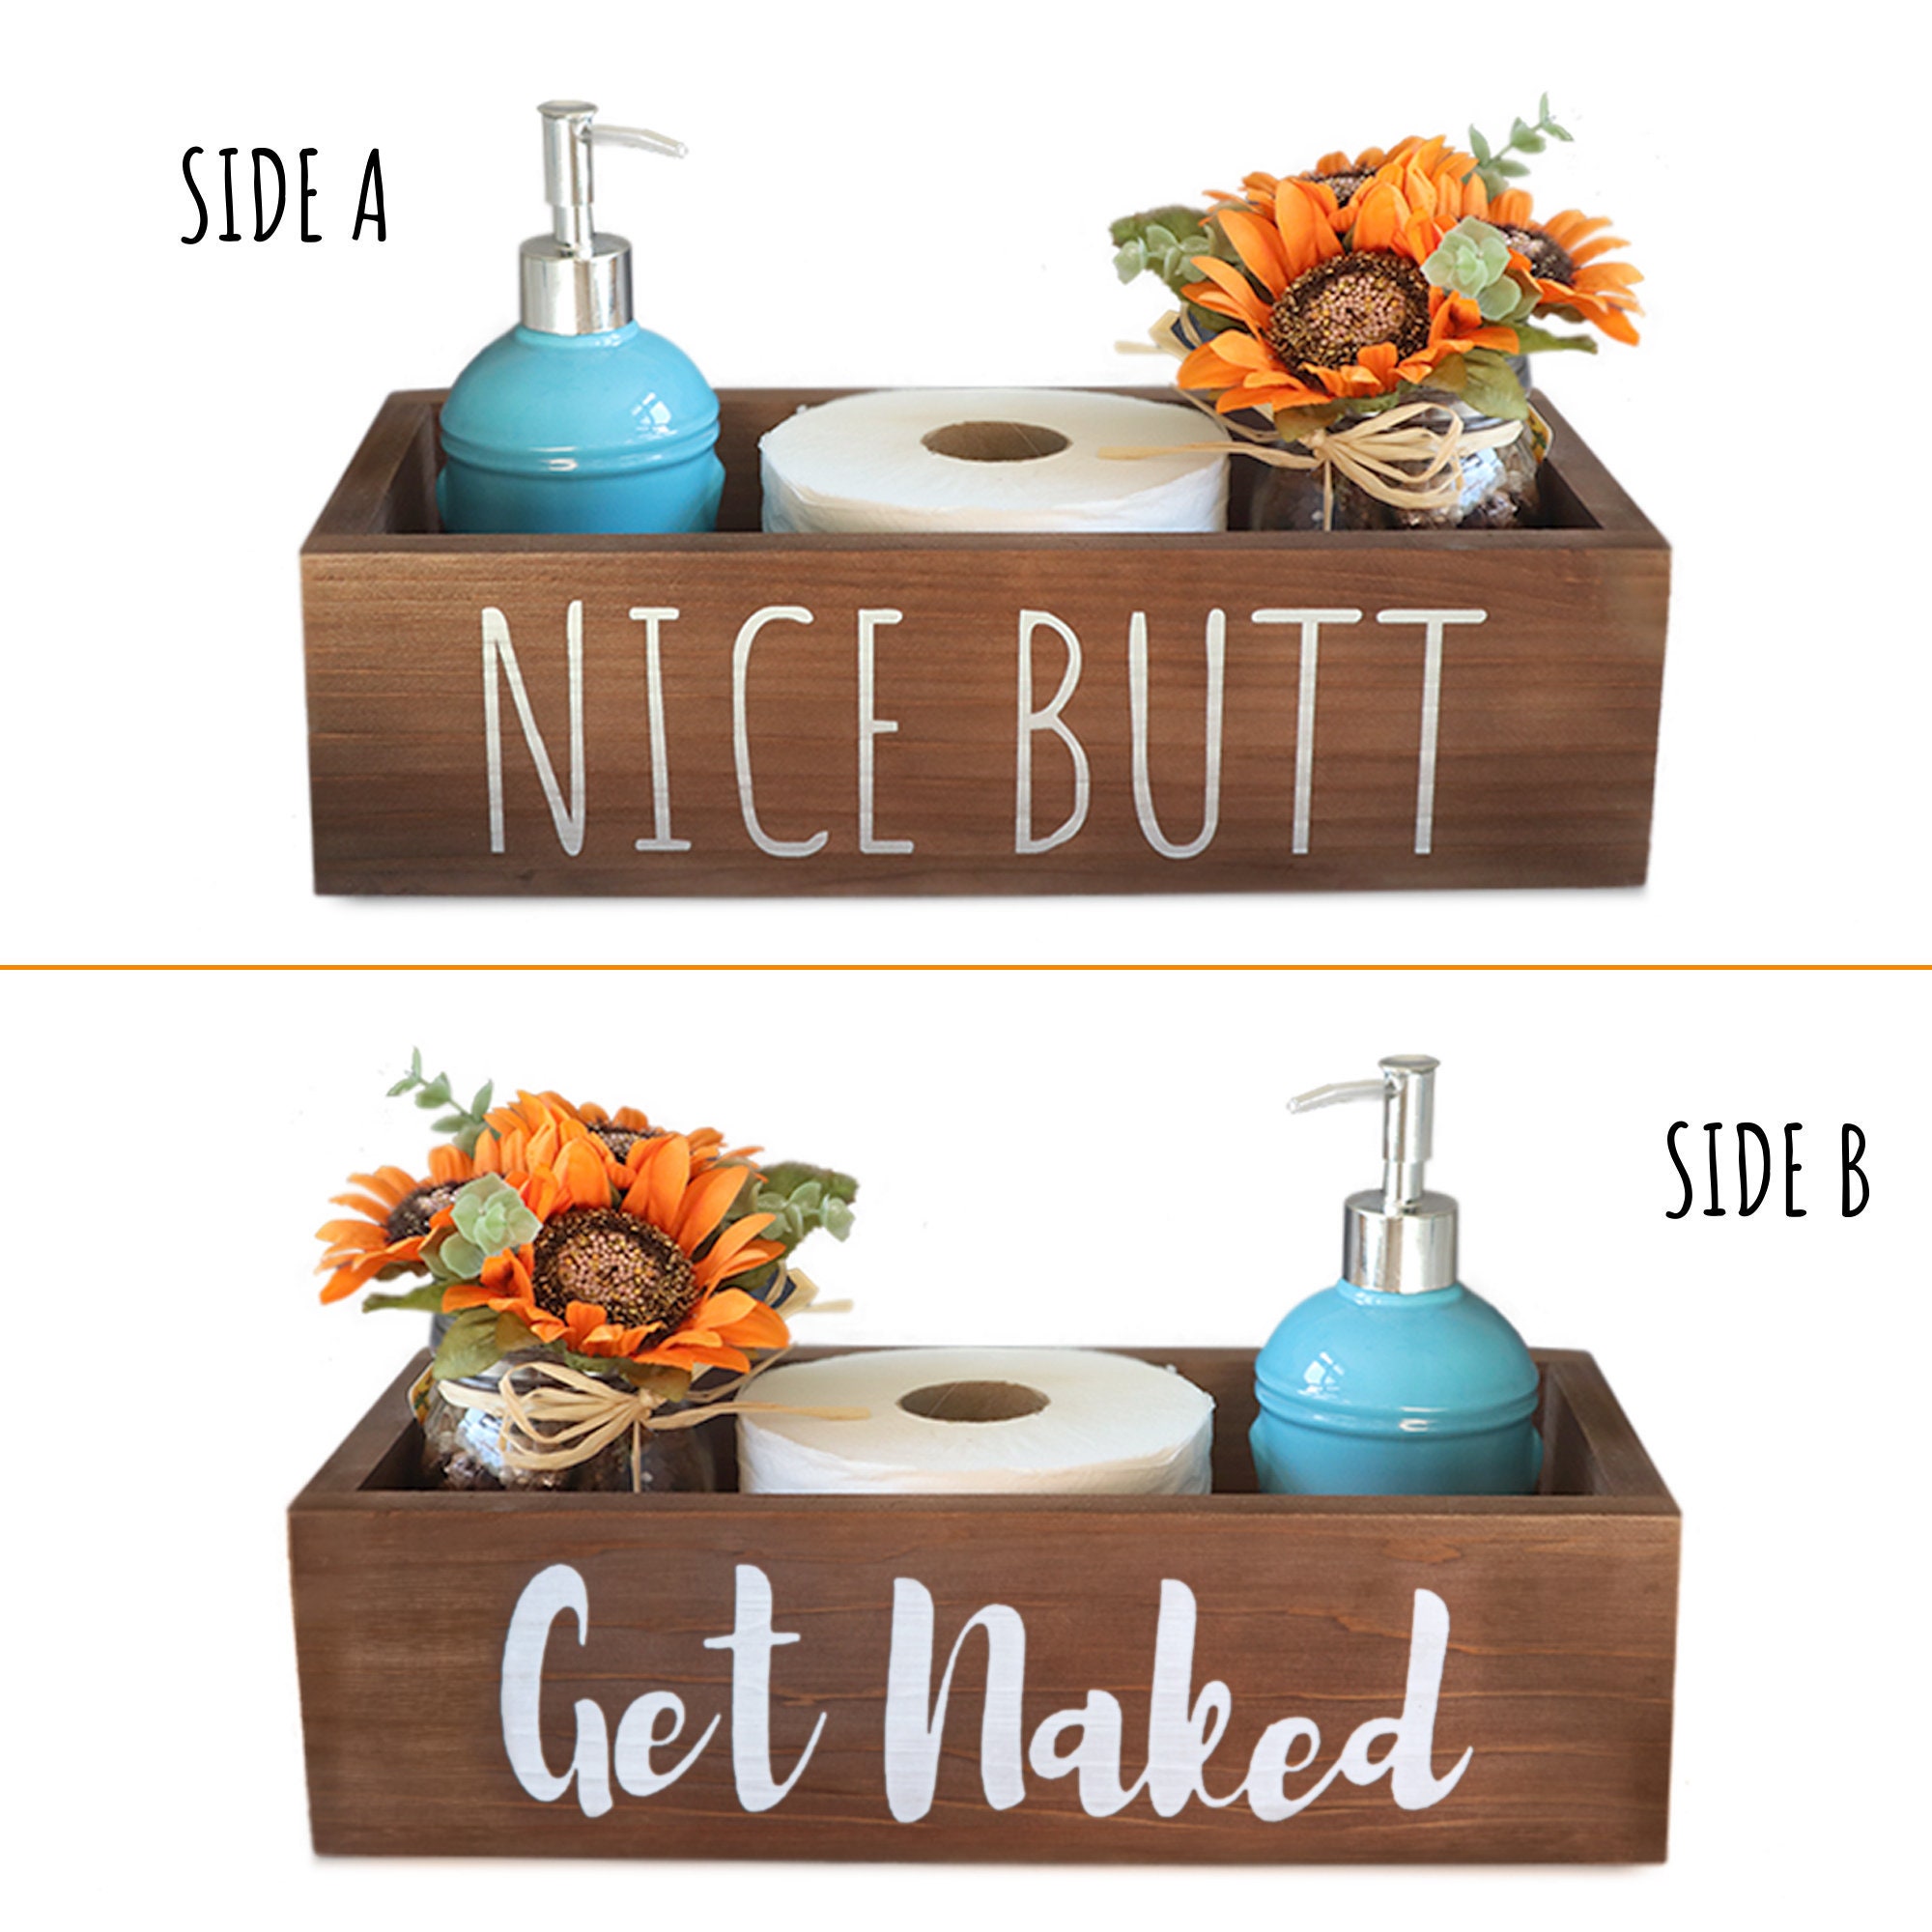 Bathroom Decor Box, 2 Sides with Funny Sayings -Perfect for